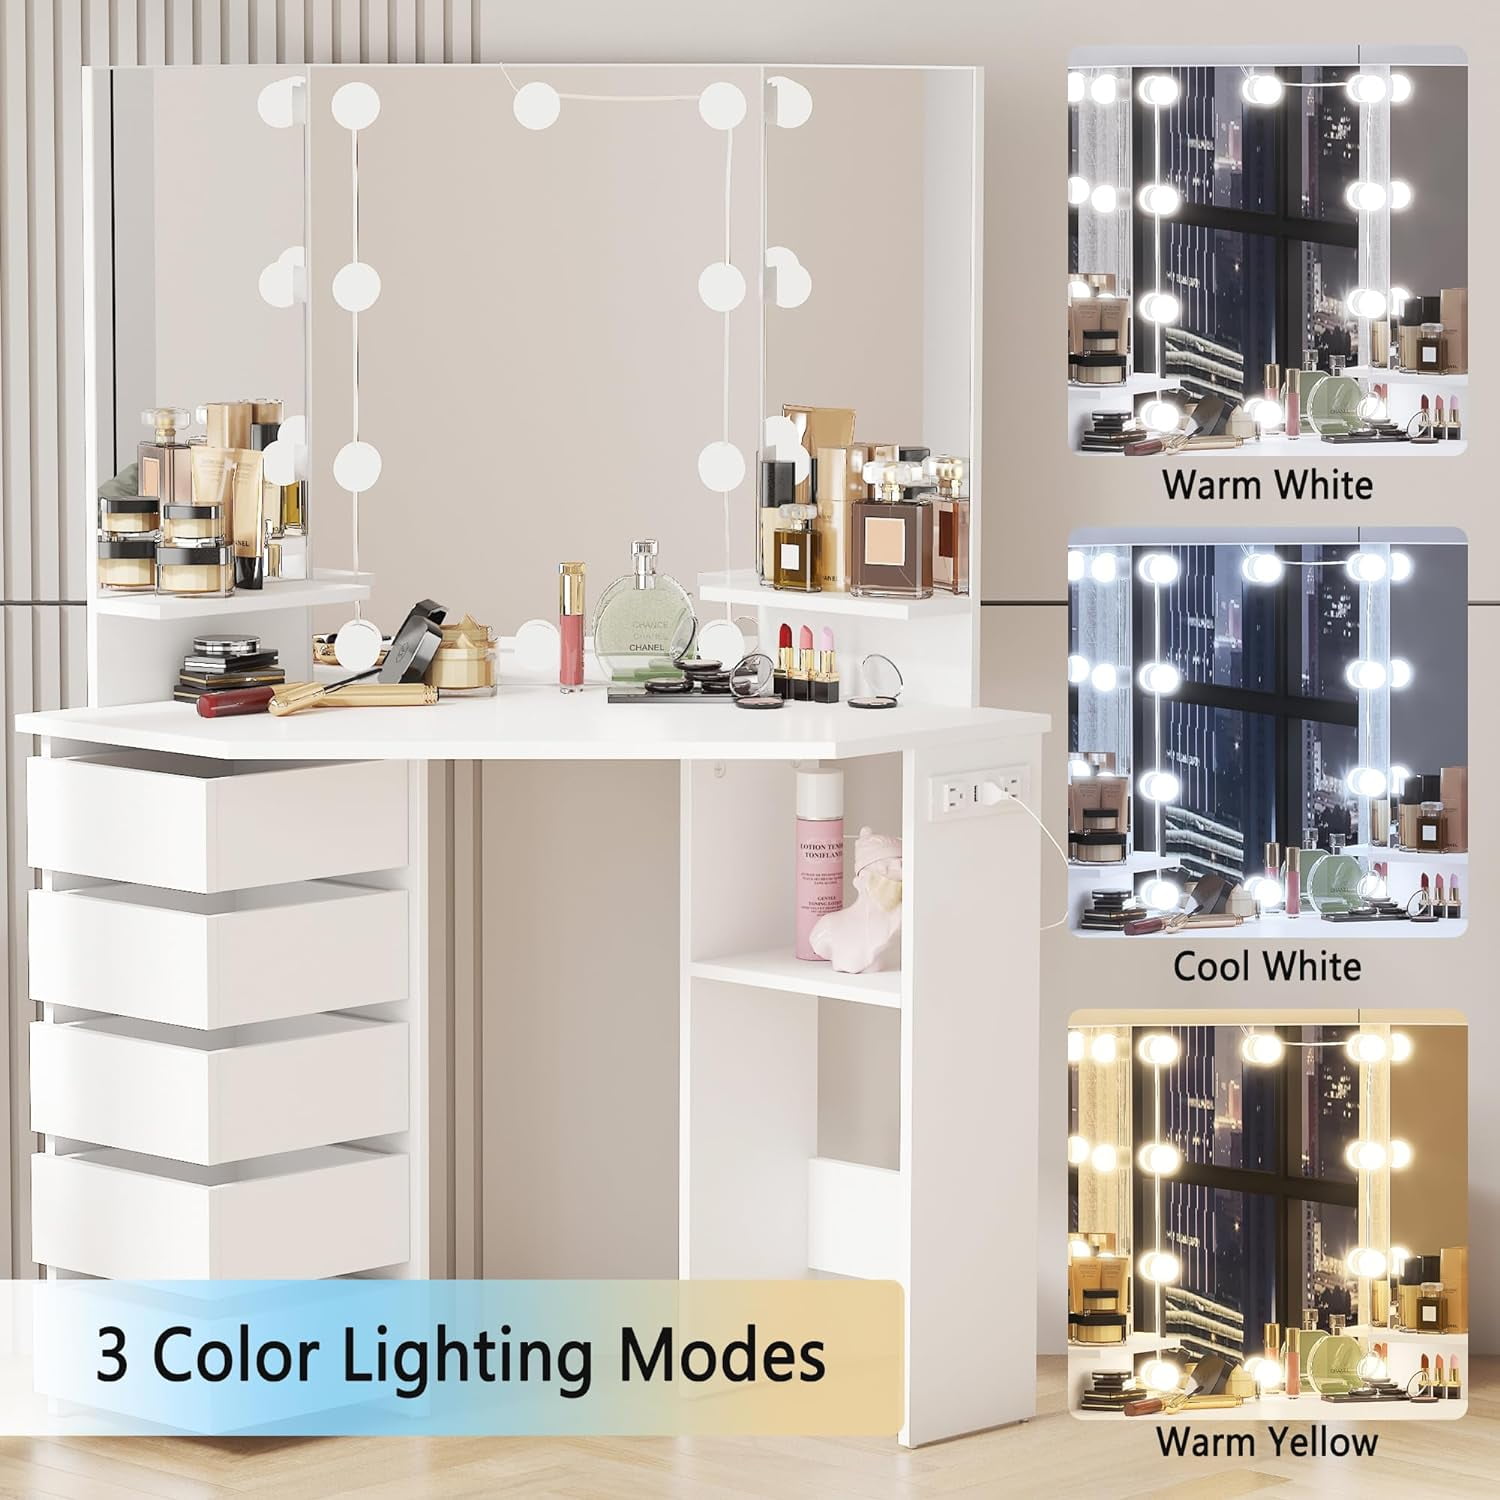 1pc LED Vanity Lights For Mirror 13ft, 3 Color Vanity Mirror Lights  Adjustable Brightness 3 Button/App Control Bright Makeup Mirror Lights  Stick On For Vanity Desk Dressing Room Mirror,Mirror Not Included